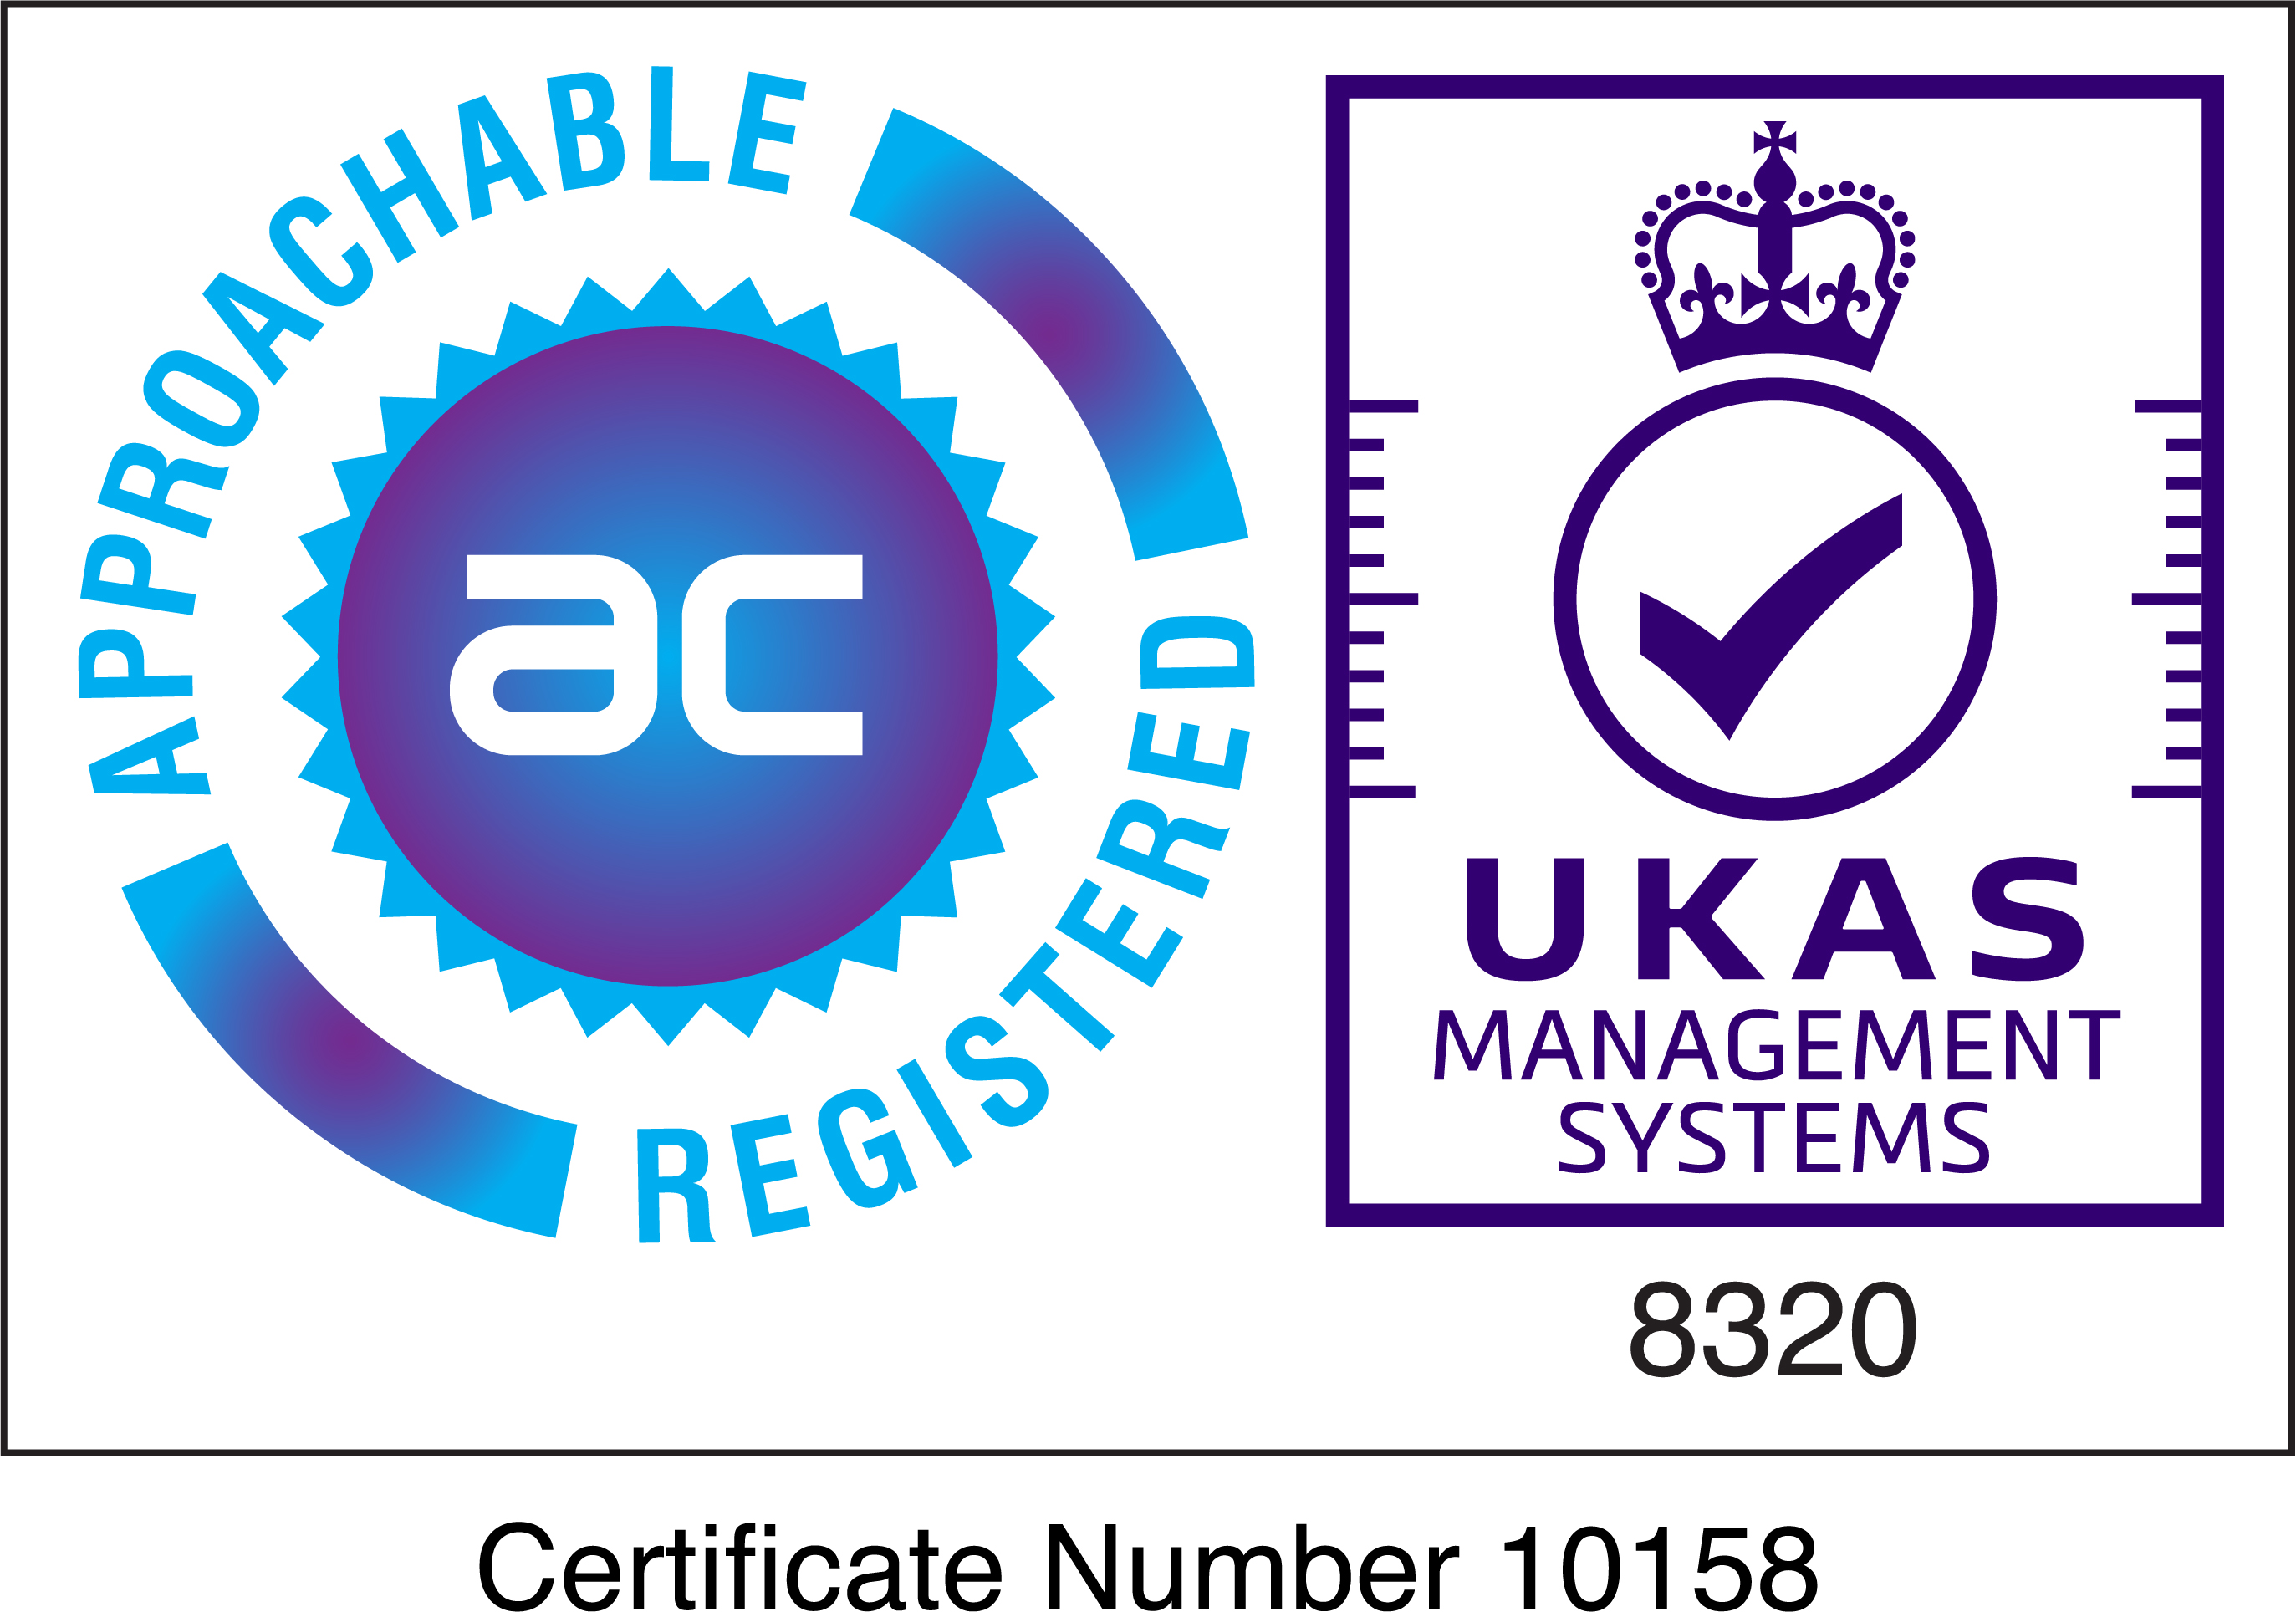 G23 Engineering Ltd are Approachable Certified